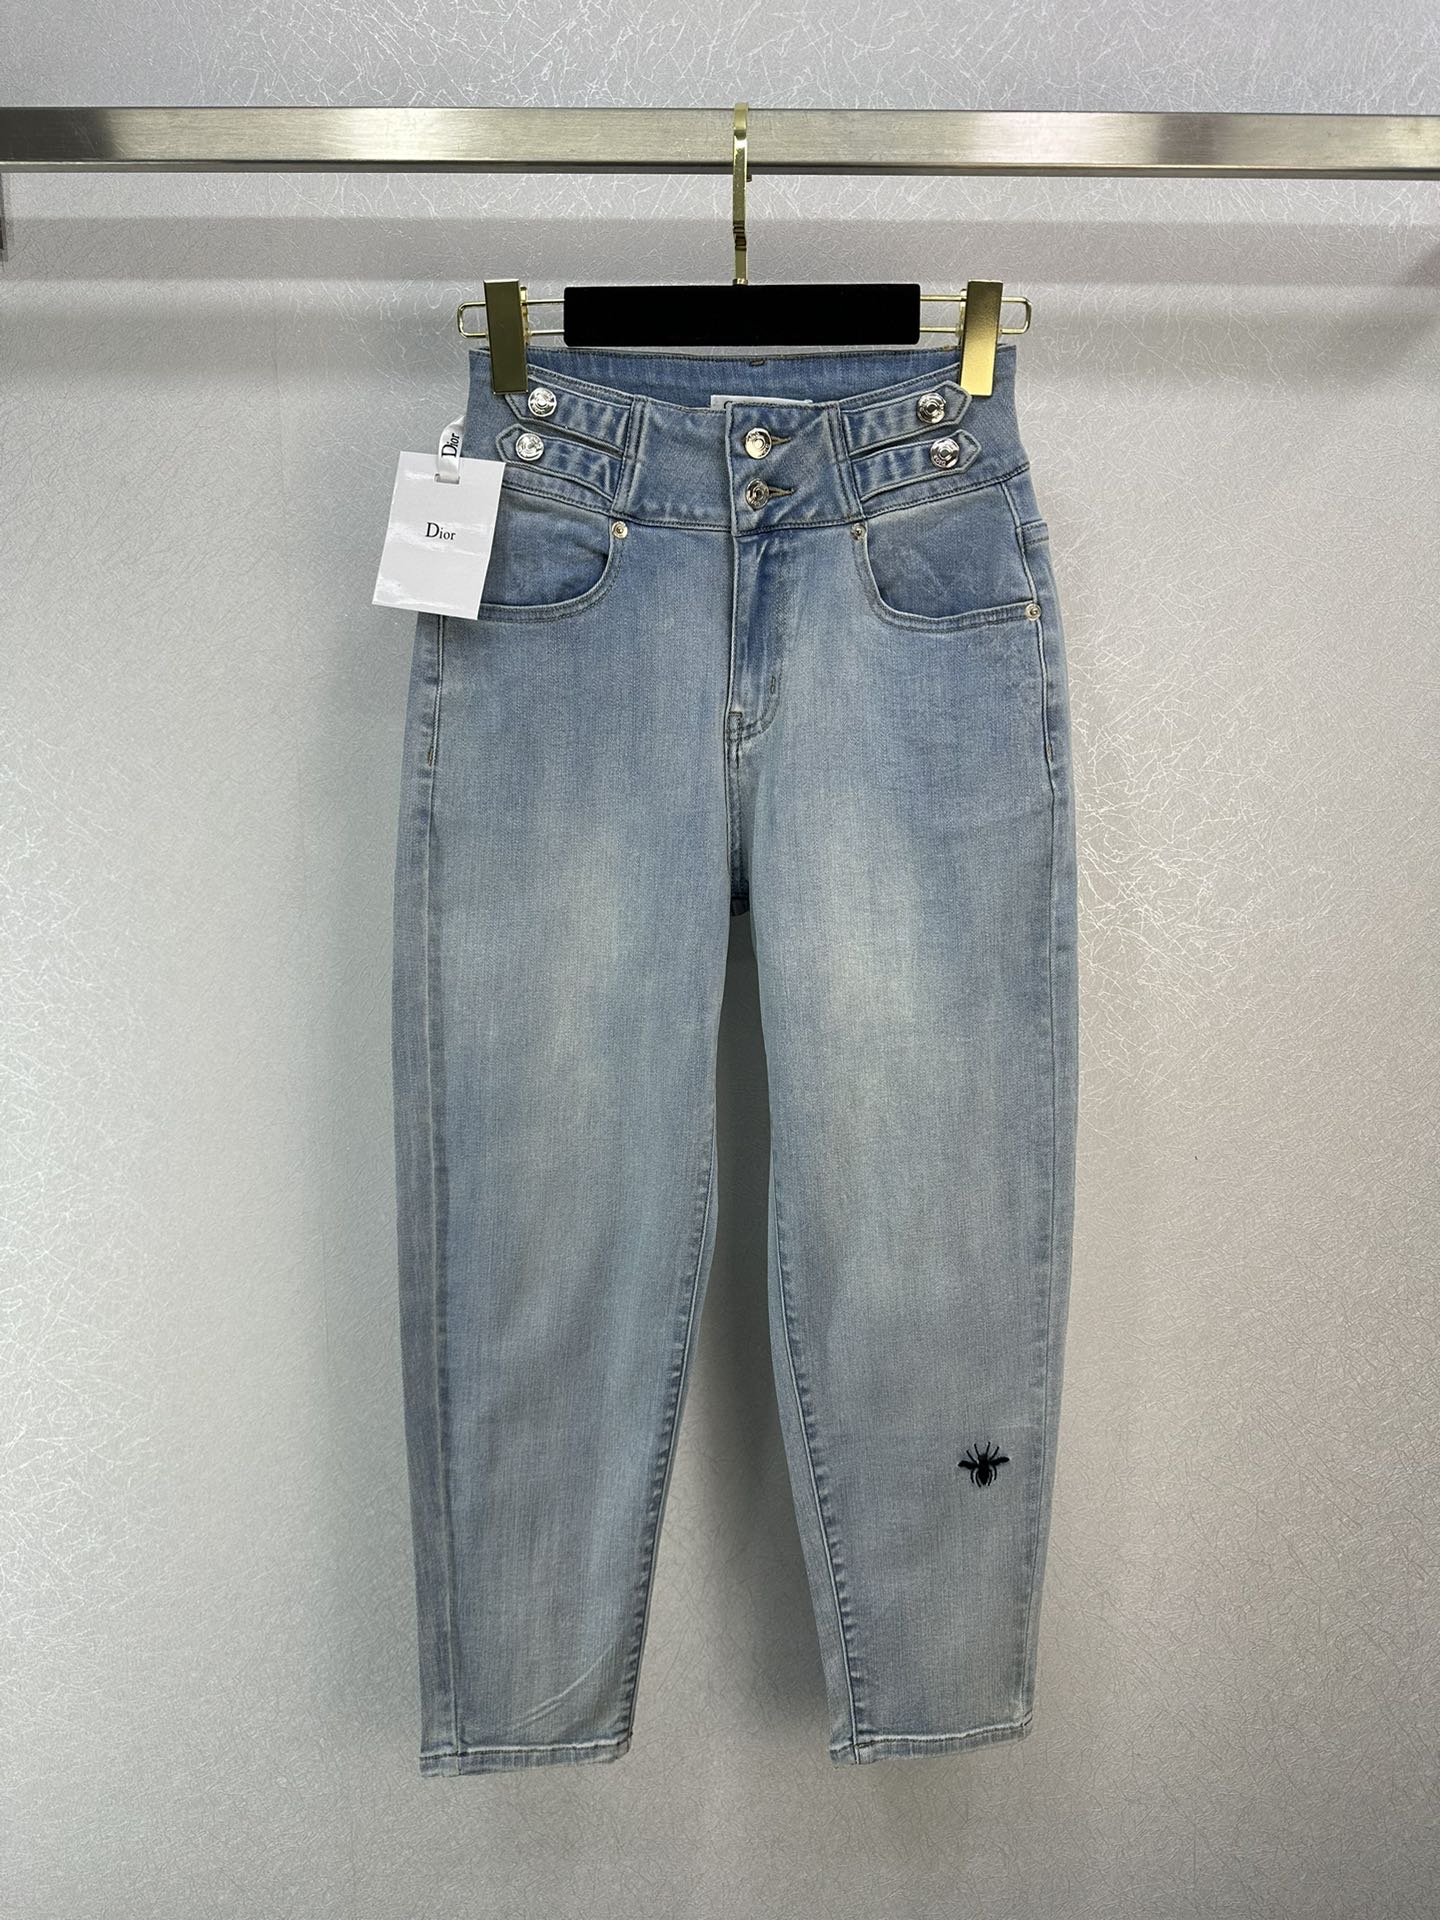 Dior Clothing Jeans Embroidery Cotton